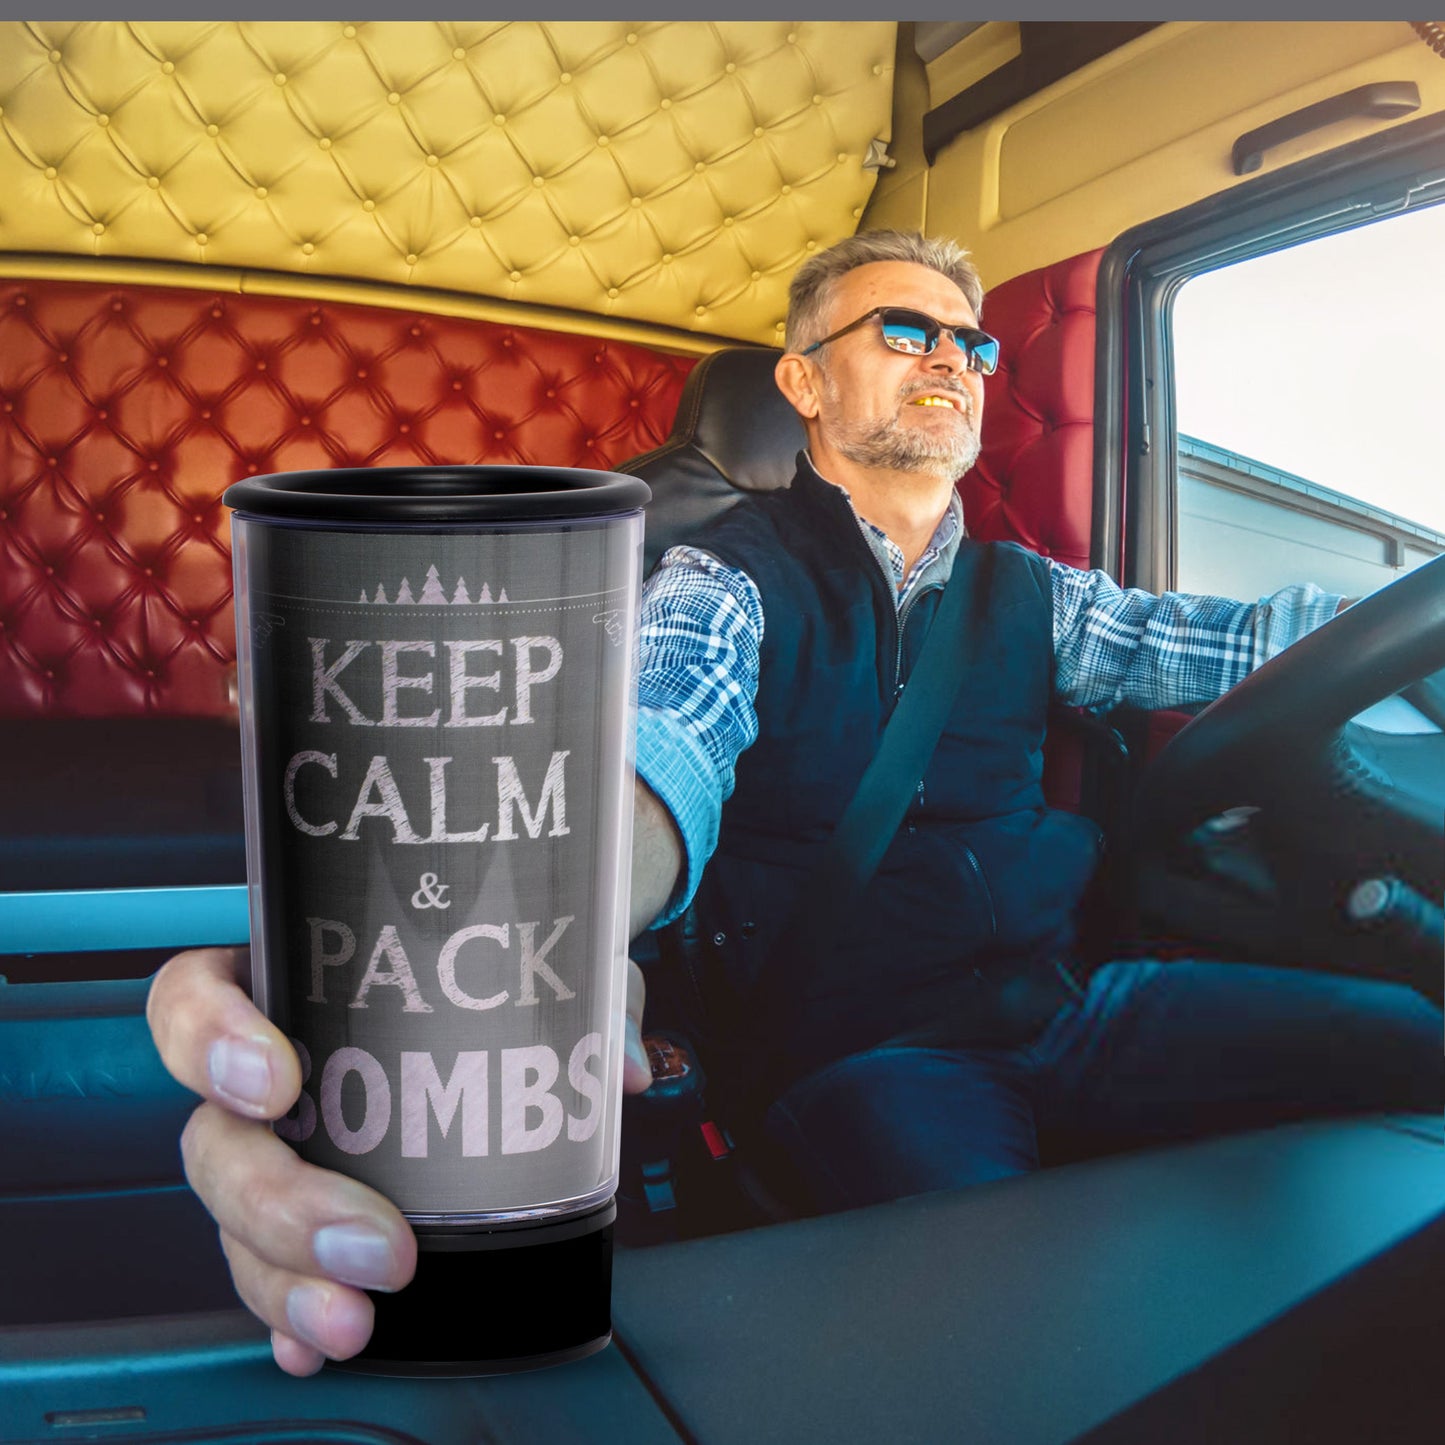 Keep Calm and Pack Bombs